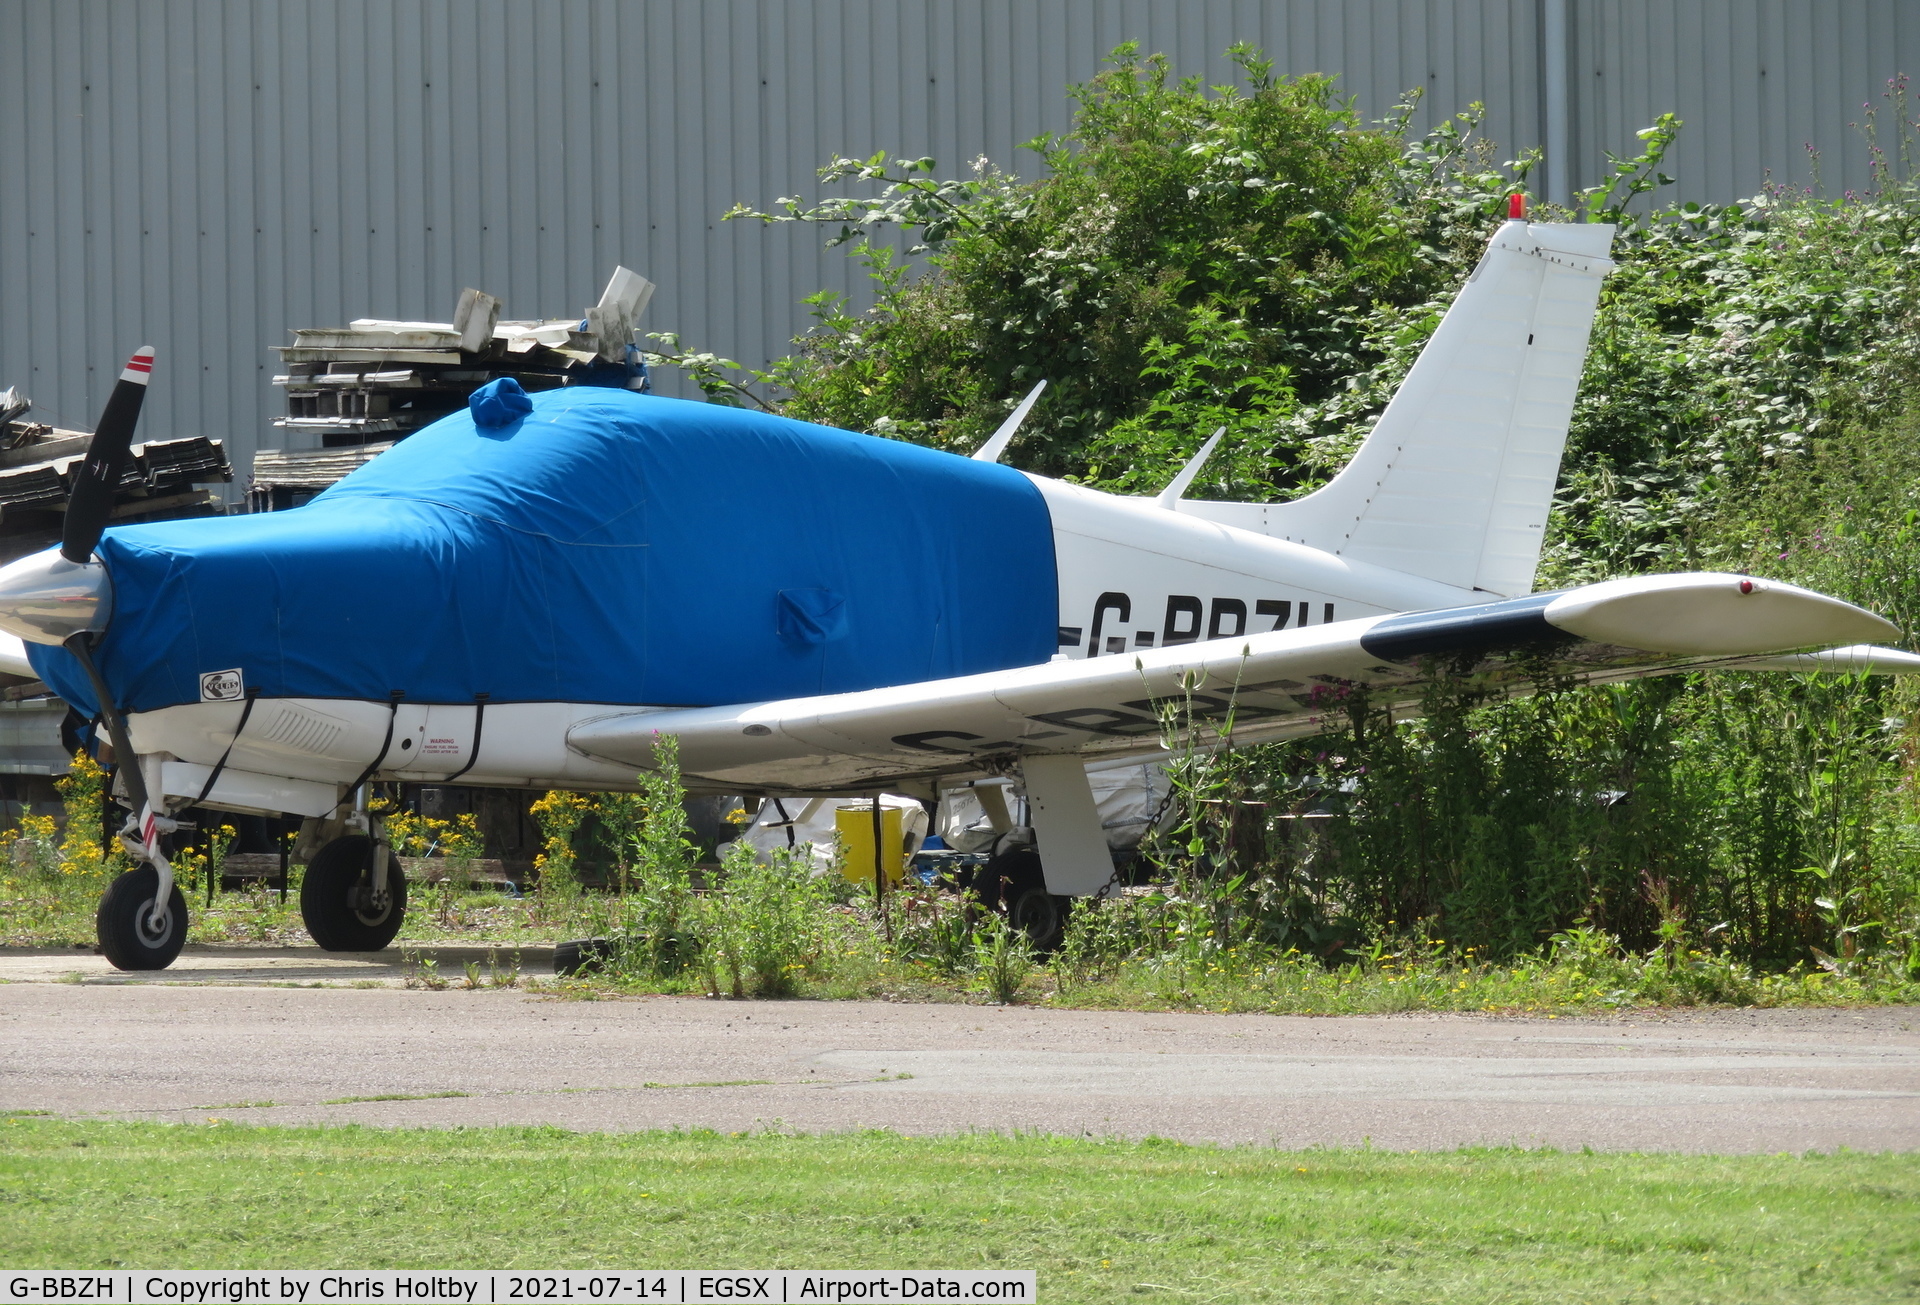 G-BBZH, 1973 Piper PA-28R-200-2 Cherokee Arrow II C/N 28R-7435102, Parked and covered at North Weald